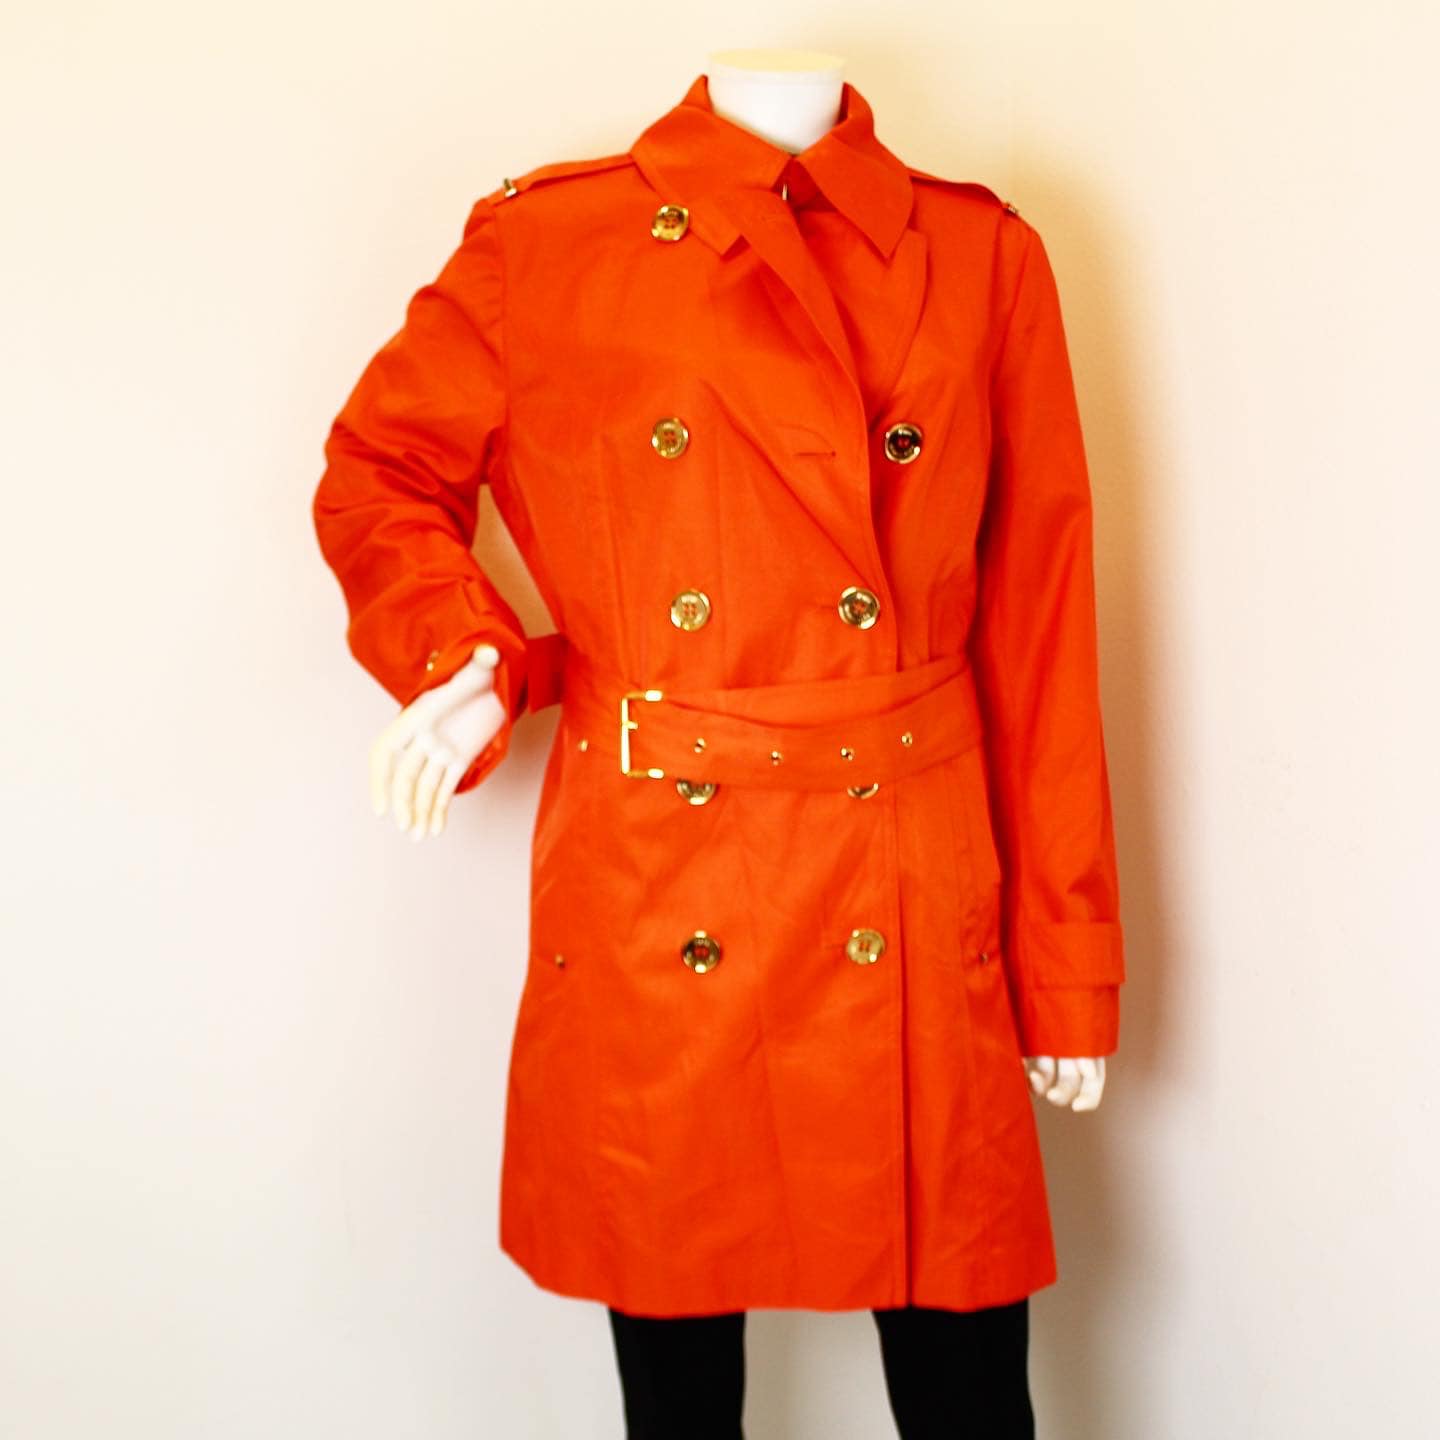 MICHAEL KORS #43350 Orange Peacoat Trench Jacket Size Large – ALL YOUR BLISS